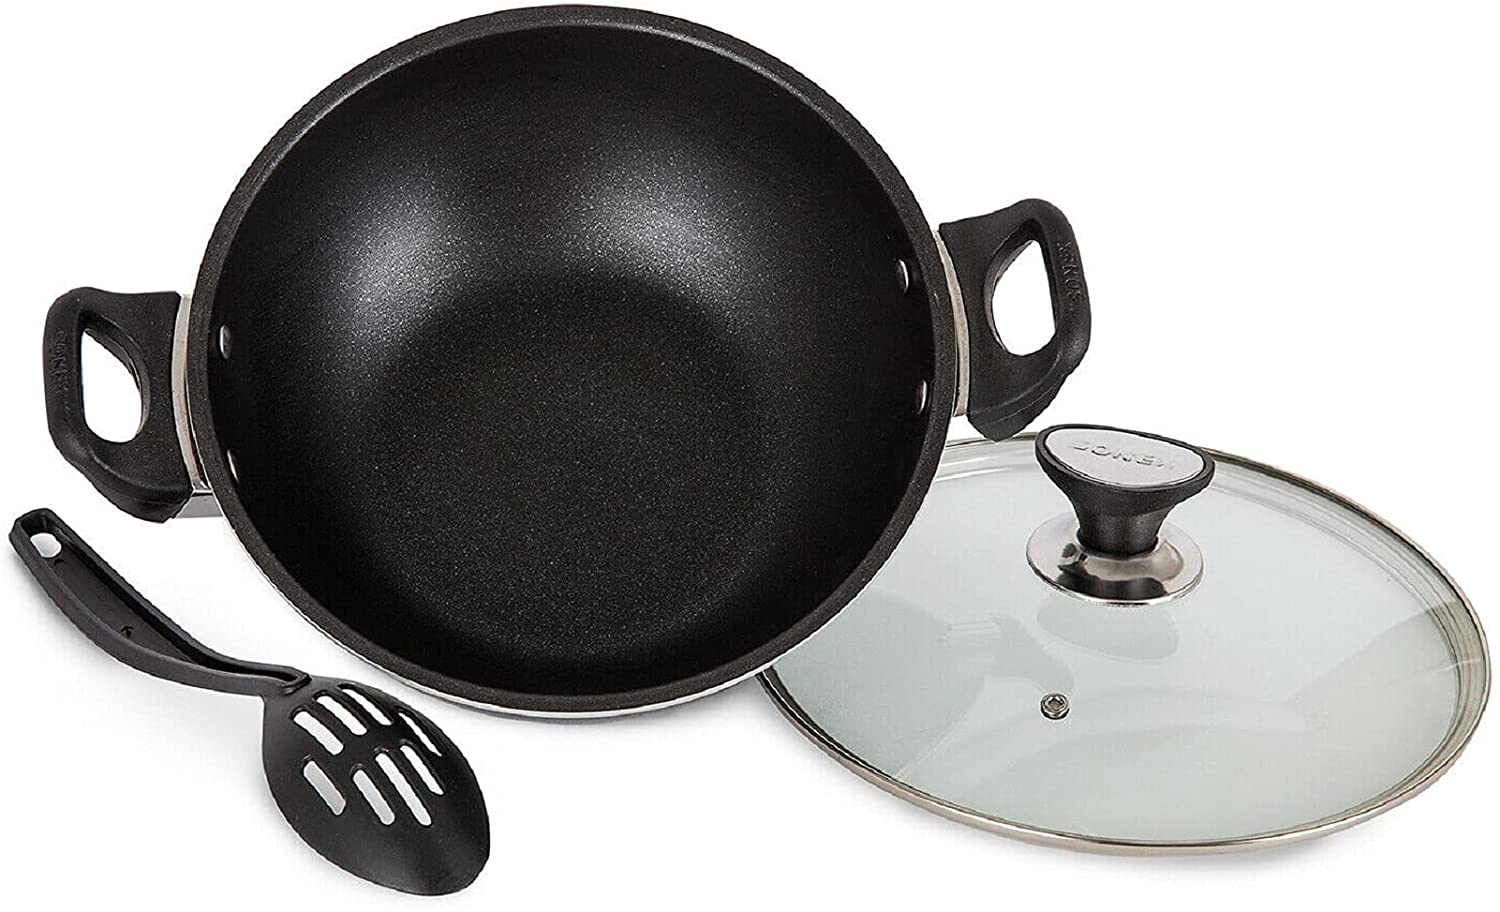 Heavy Material | Dishware Safe | Sonex | Non Stick | Cooking Wok | Kadhai | Karahi | with Glass Lid and Spoon Durable Soft Handles 36 Cm | Easy To Clean | Original Made In Pakistan – 50052